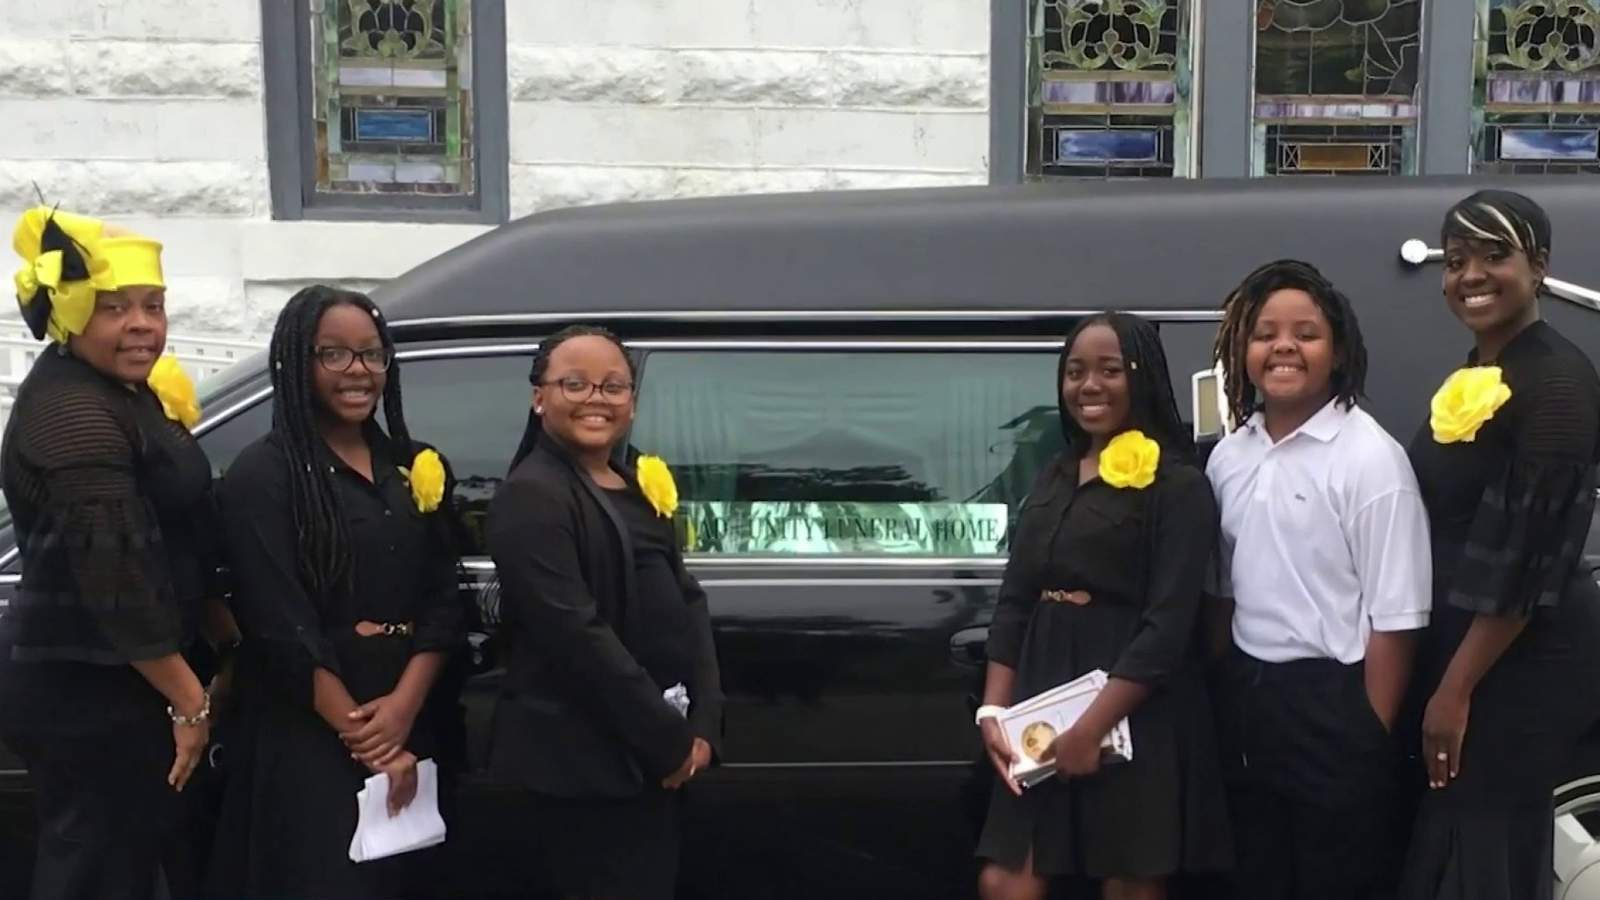 Volusia funeral home staff helps families navigate difficulties of death during COVID-19